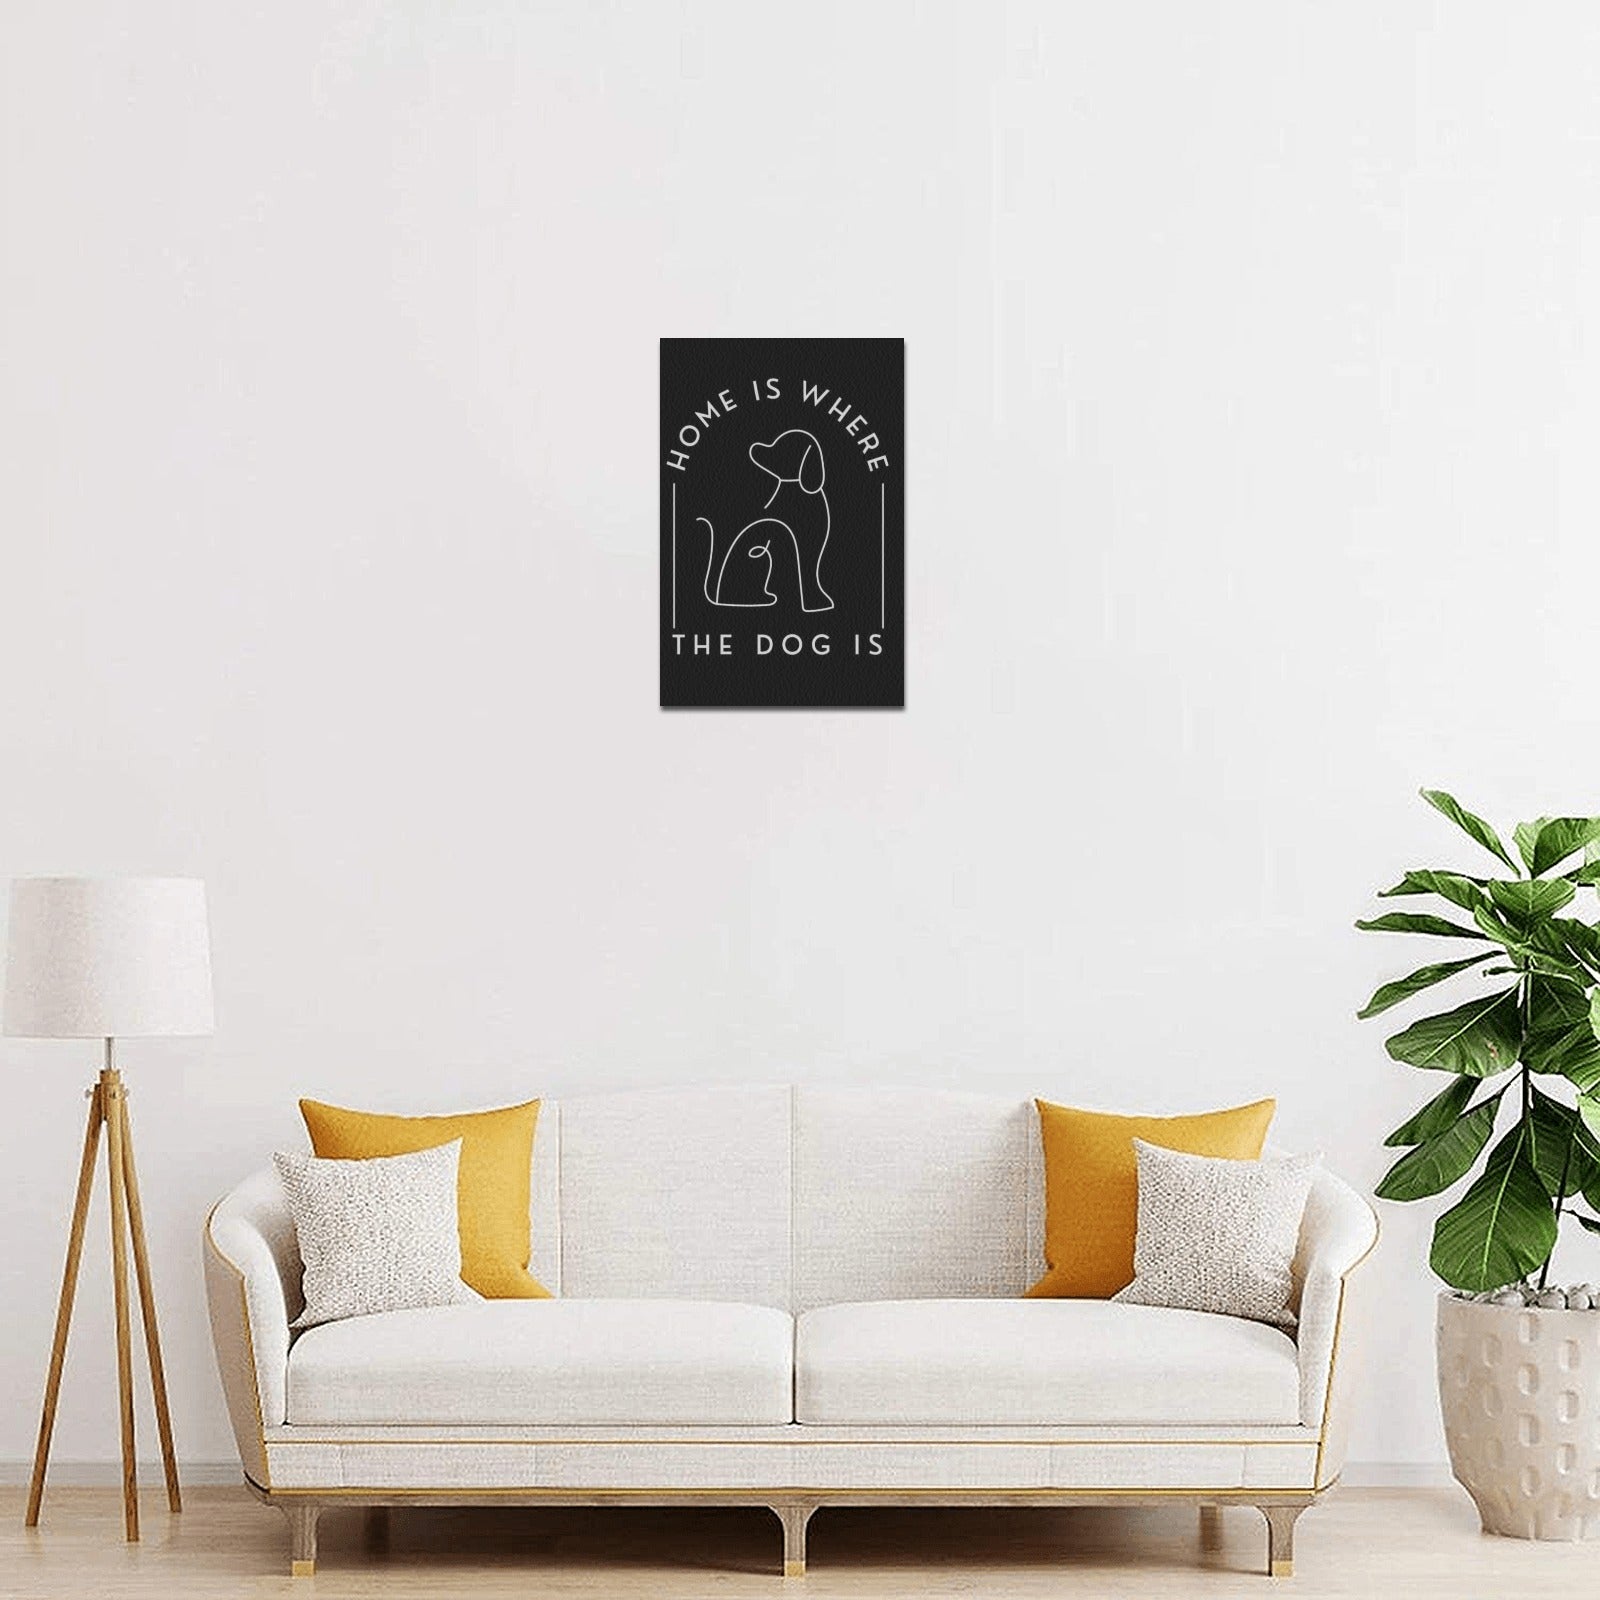 Home Is Where The Dog Is Canvas Wall Art - 8"x12"